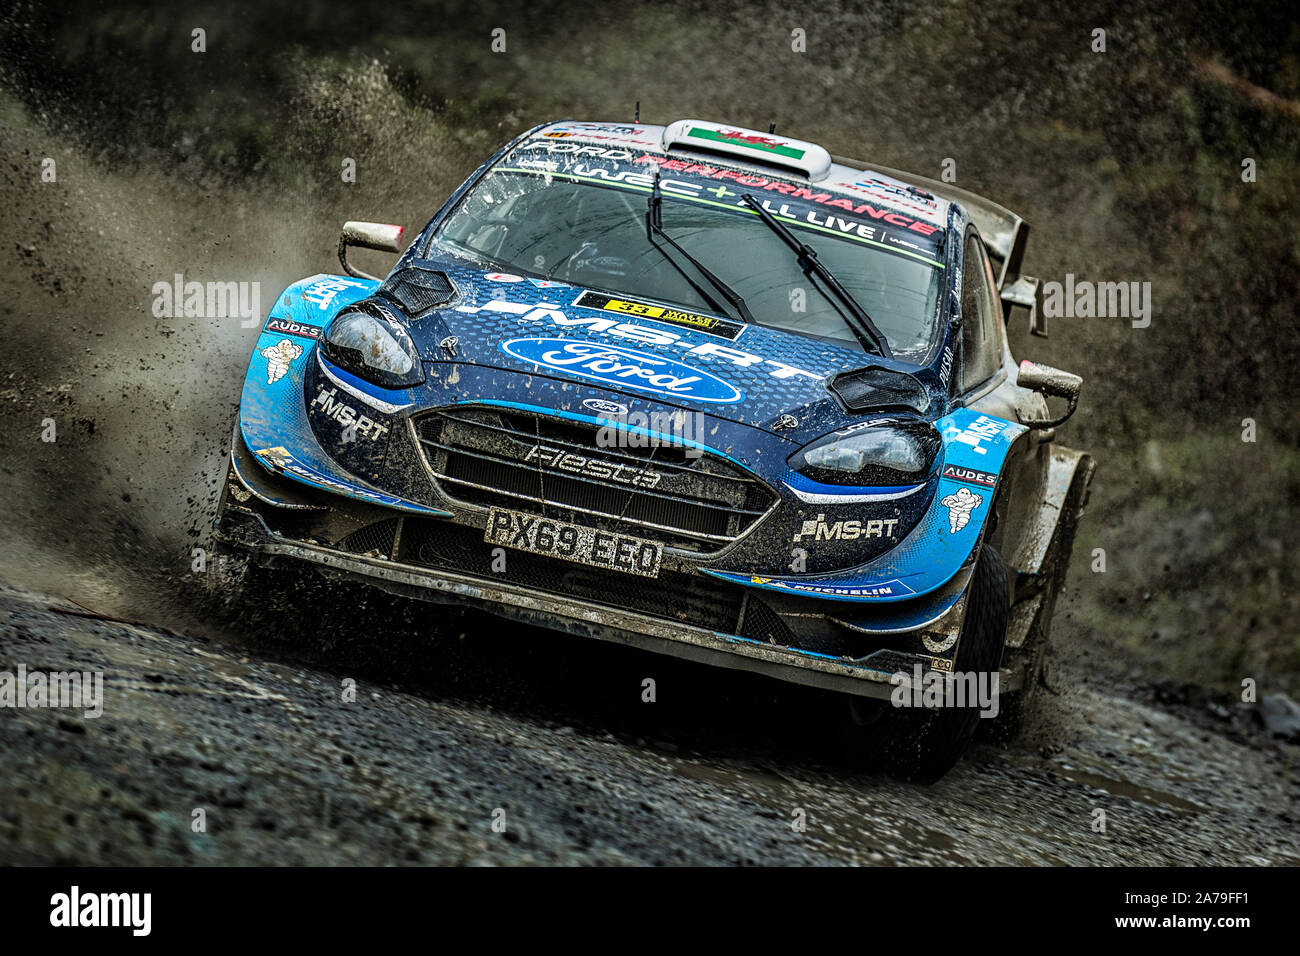 Elfyn Evans driving his Ford Fiesta through a watersplash for the M-Sport Ford Perfomance World Rally Team at the 2019 WRC Wales Rally GB, Wales, UK Stock Photo